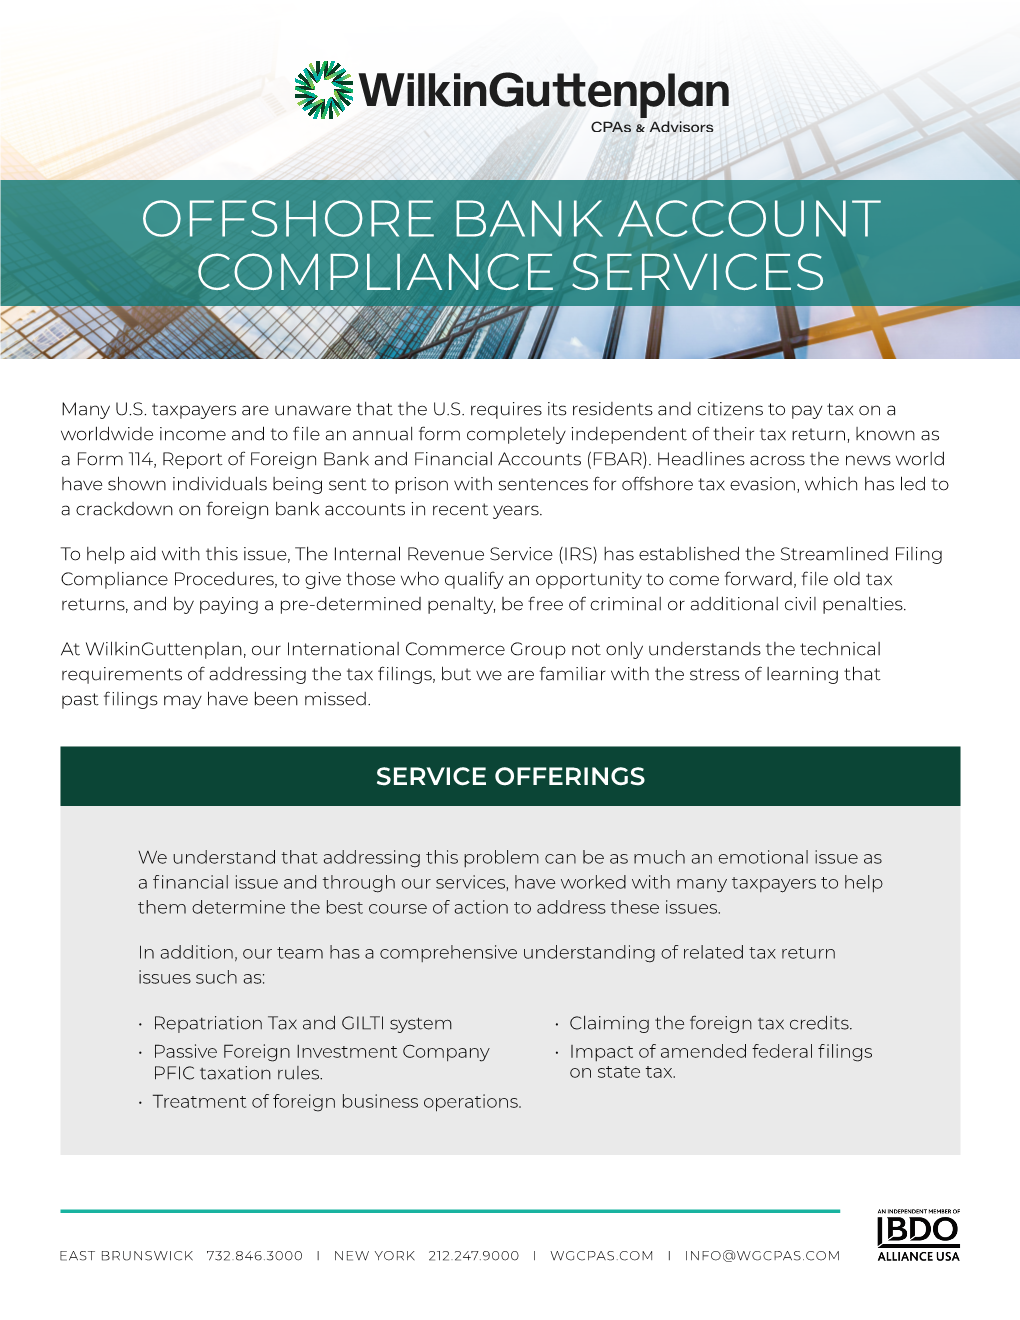 PDF of International Commerce Offshore Bank Account Compliance